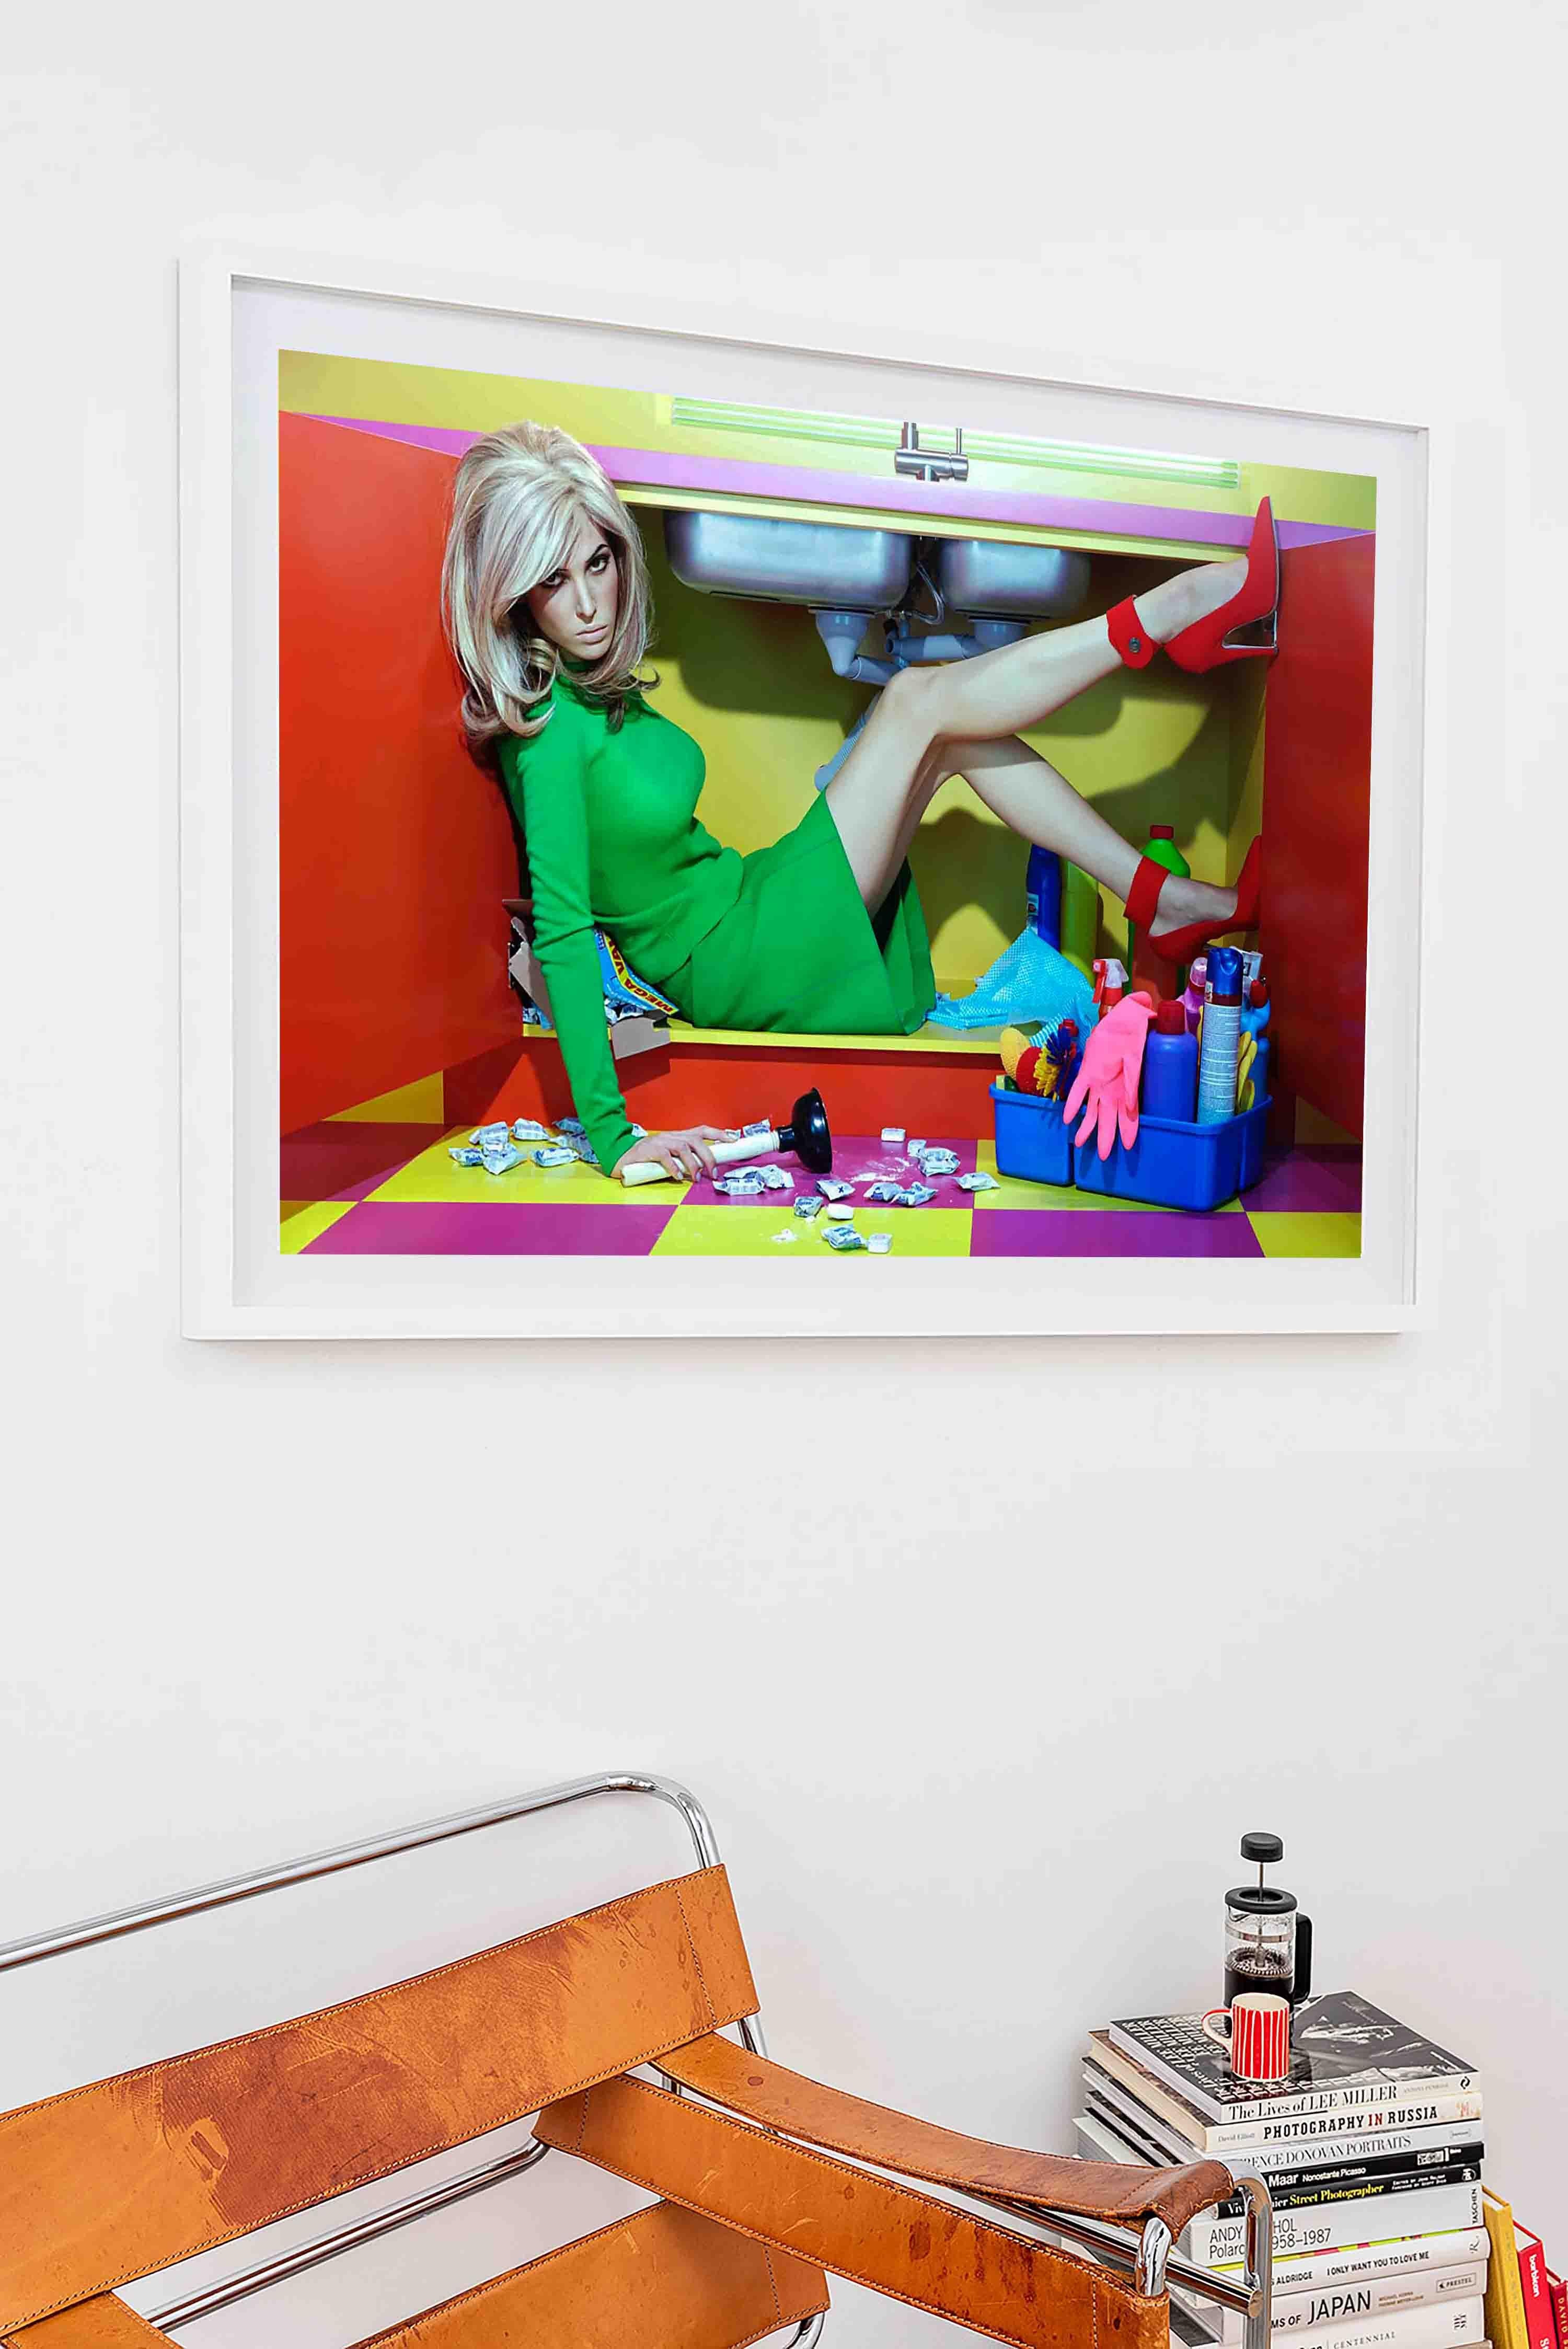 I Only Want You To Love Me #4, 2011 - Miles Aldridge (Colour Photography) For Sale 1